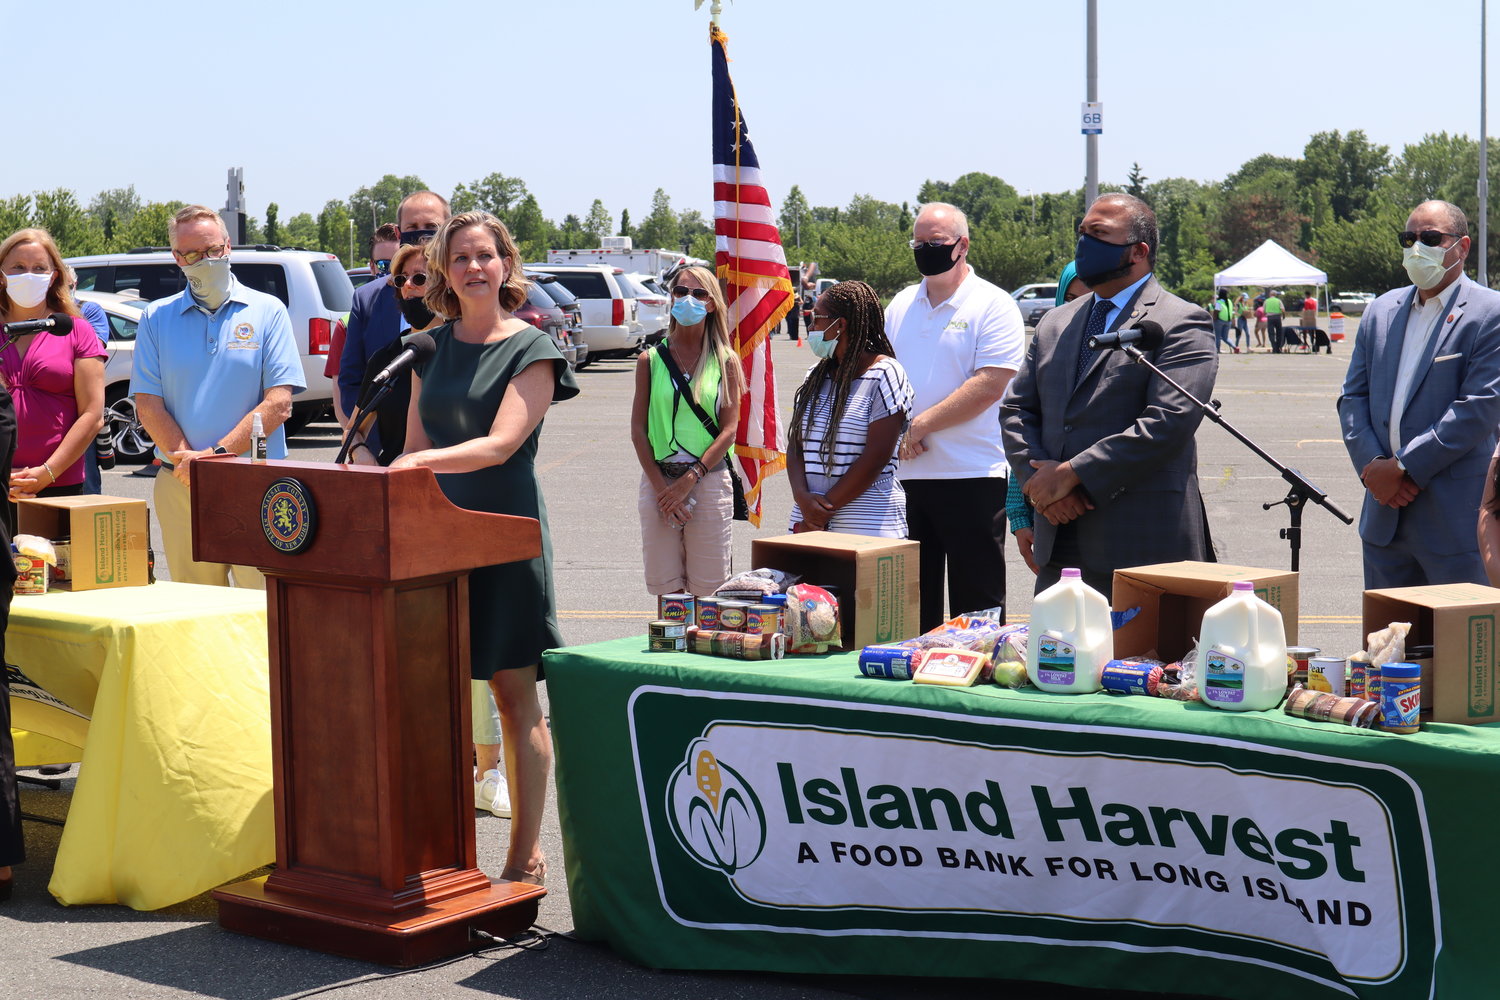 Nassau County Executive Laura Curran kicked-off the event, which was a partnership with non-profit Island Harvest.